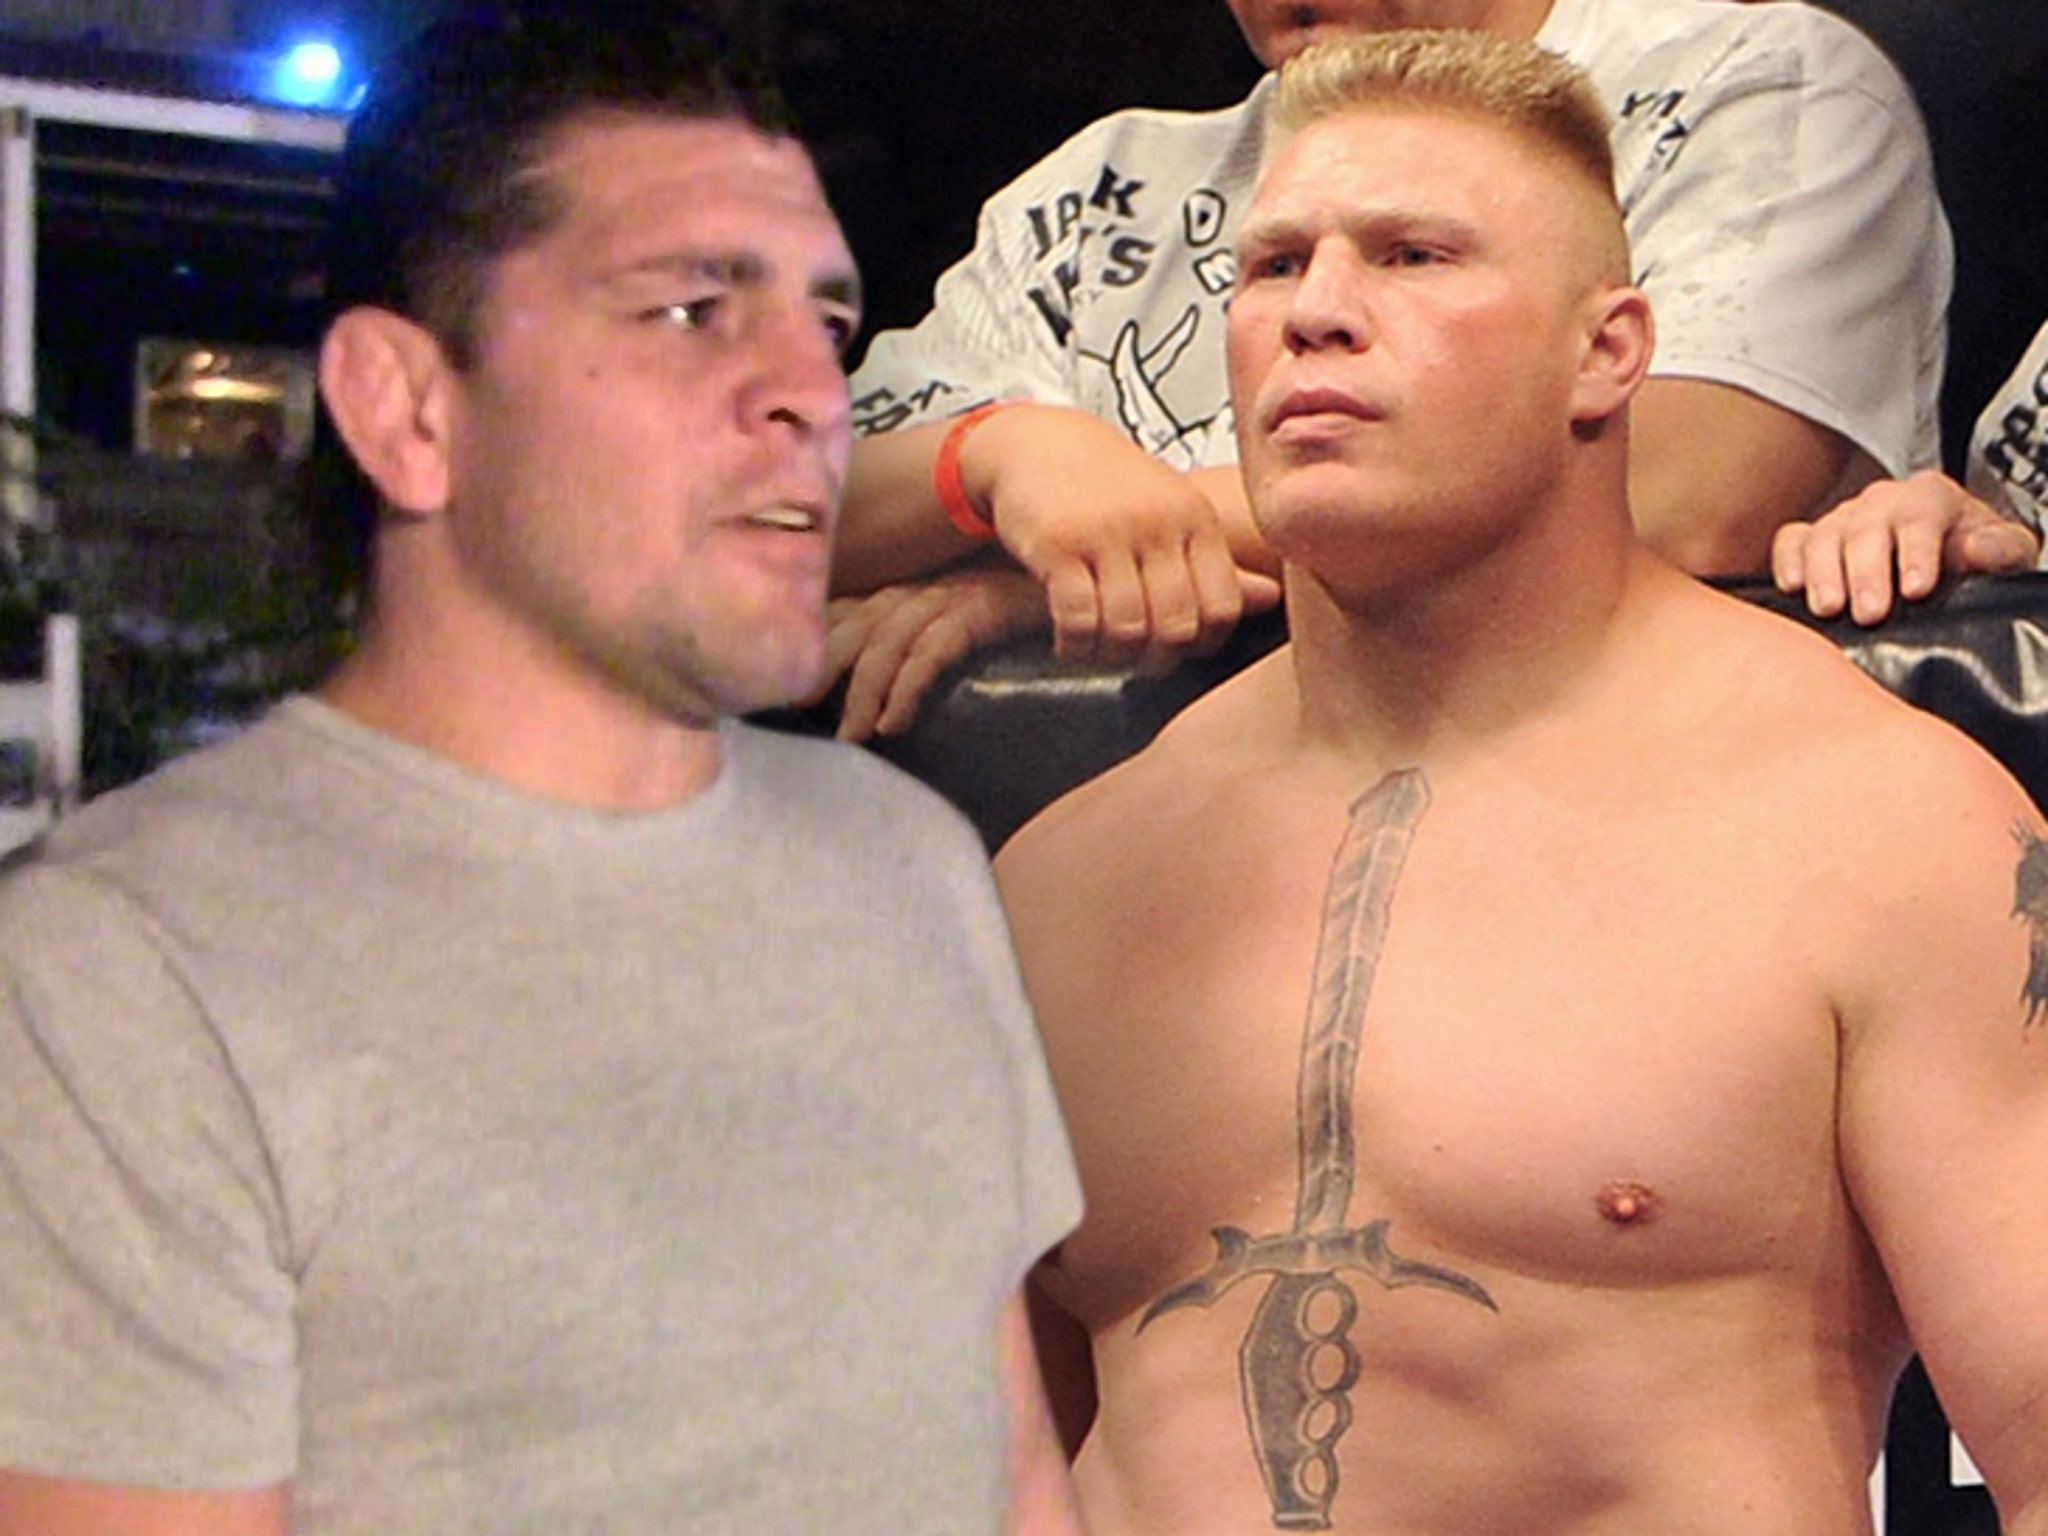 Nick Diaz Blasts 'Dick Chest' Brock Lesnar, You're a Cheater!